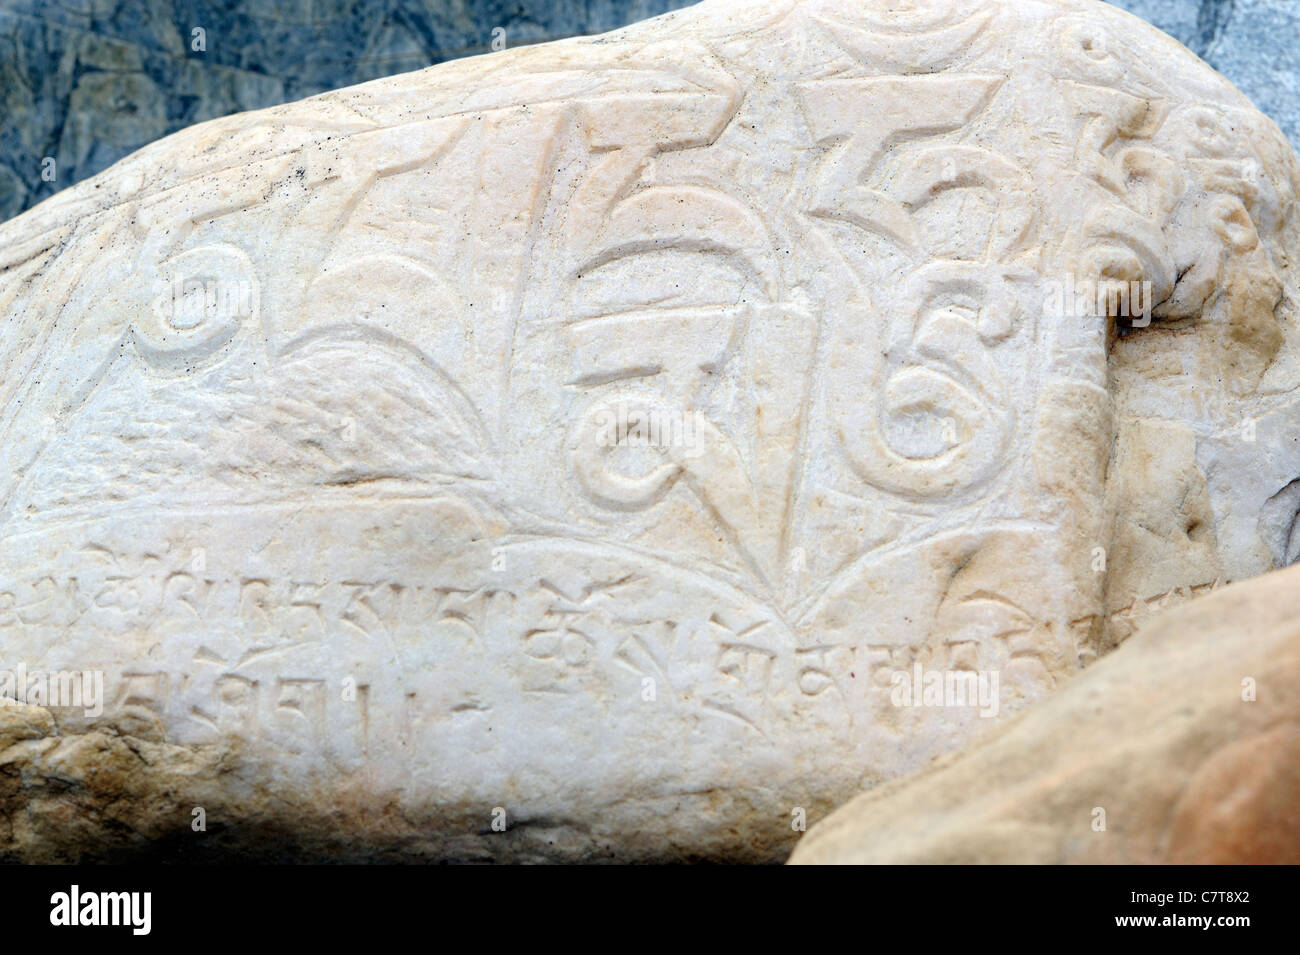 A river boulder carved with the mantra om mani padme hum on a prayer wall.  Sumar, Nubra Valley, Ladakh, Republic of India. Stock Photo